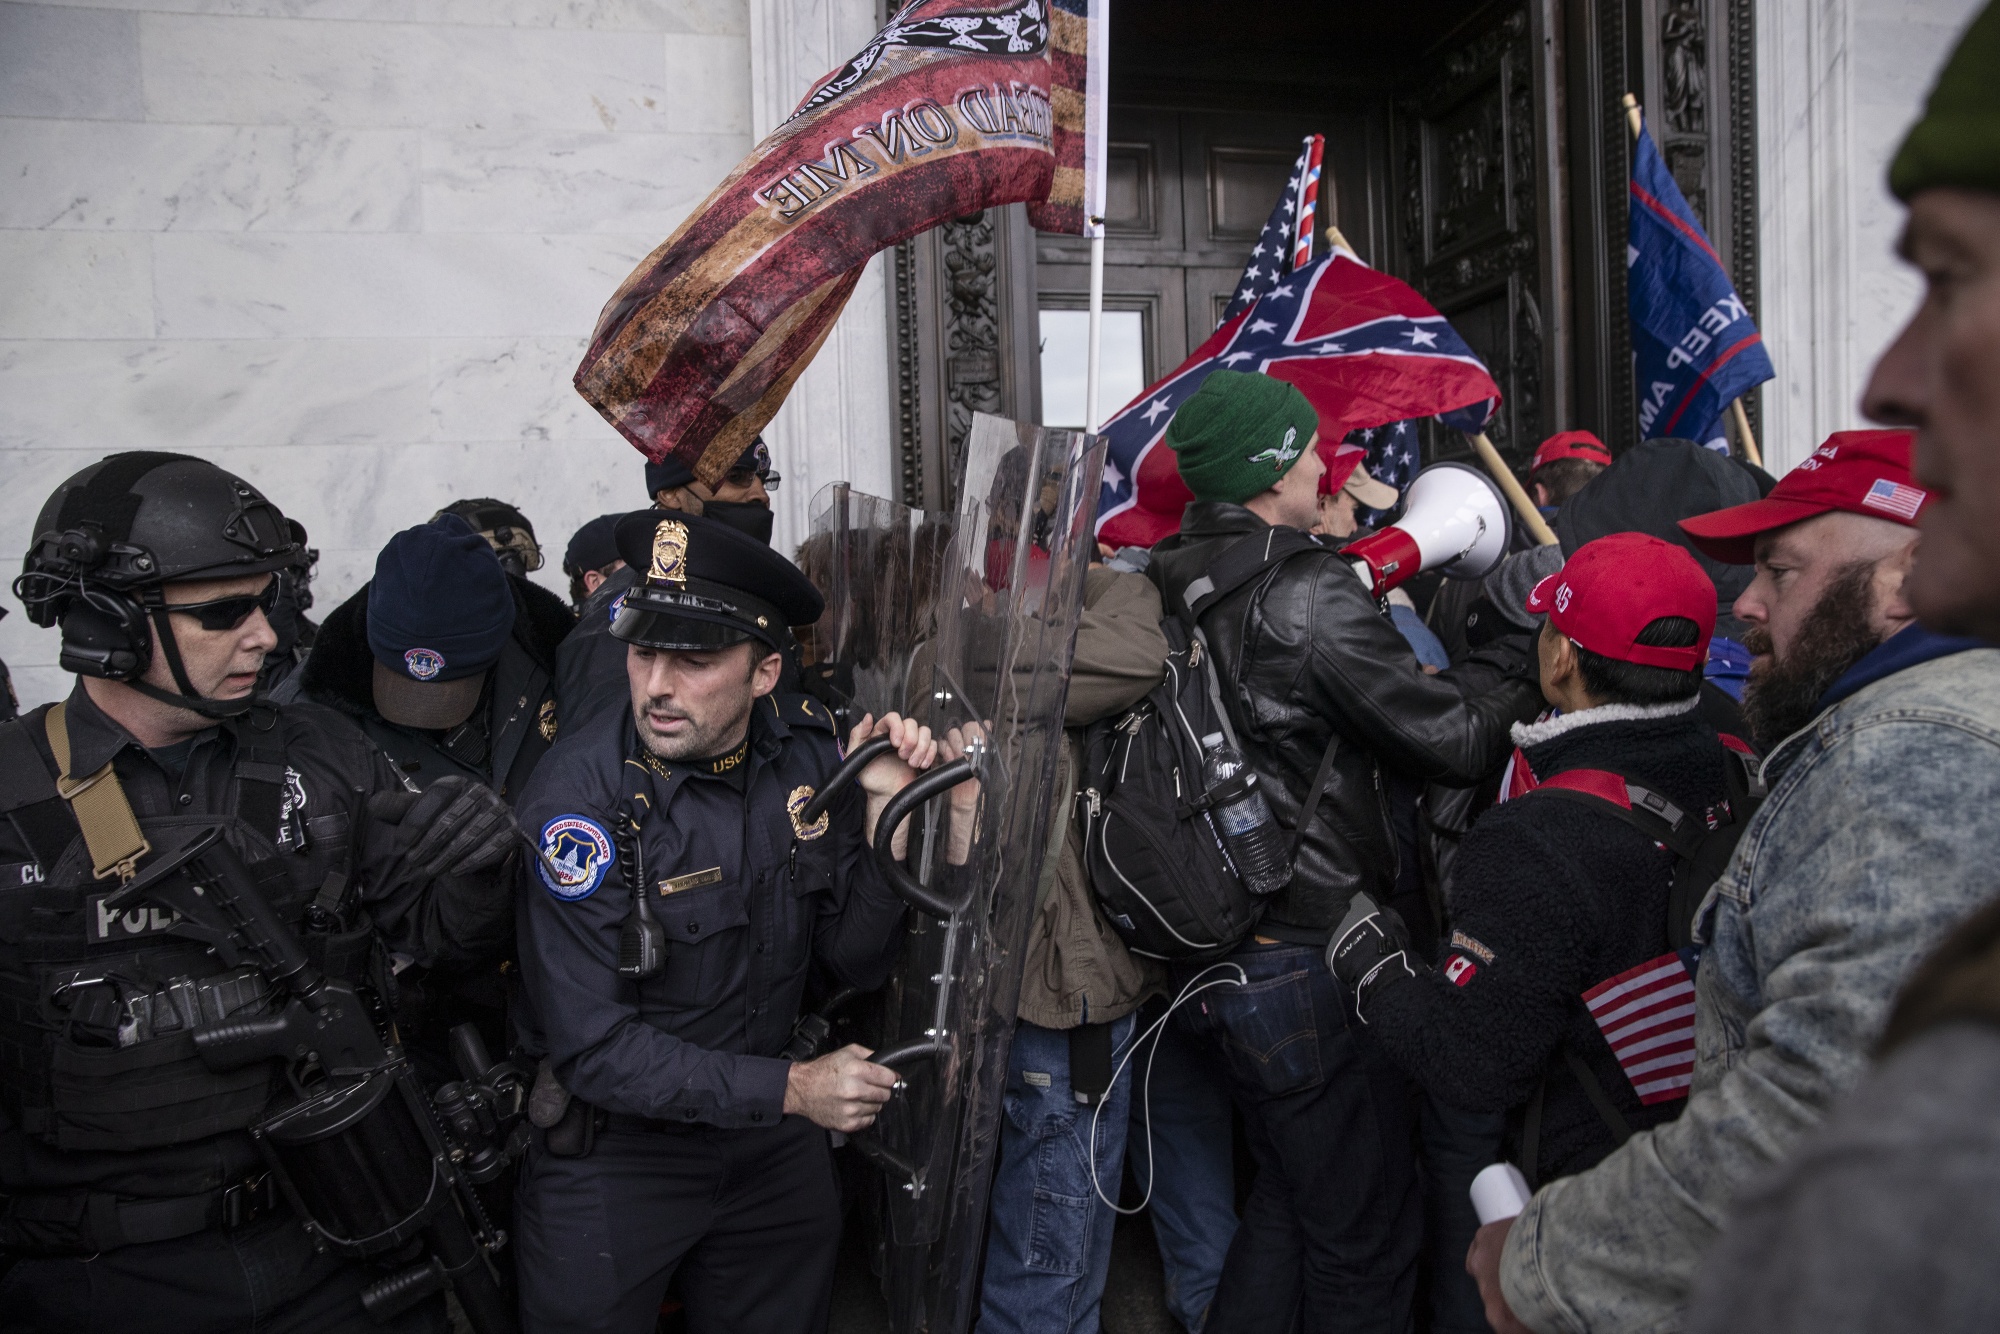 Demonstrators clash with U.S. Capitol police officers outside the&nbsp;Capitol building in Washington, D.C. on&nbsp;Jan. 6, 2021.